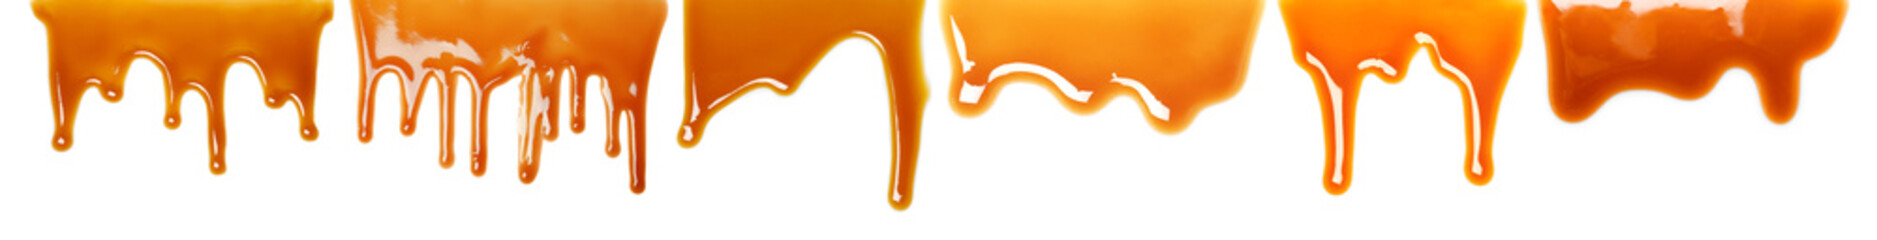 Set with delicious caramel sauce on white background